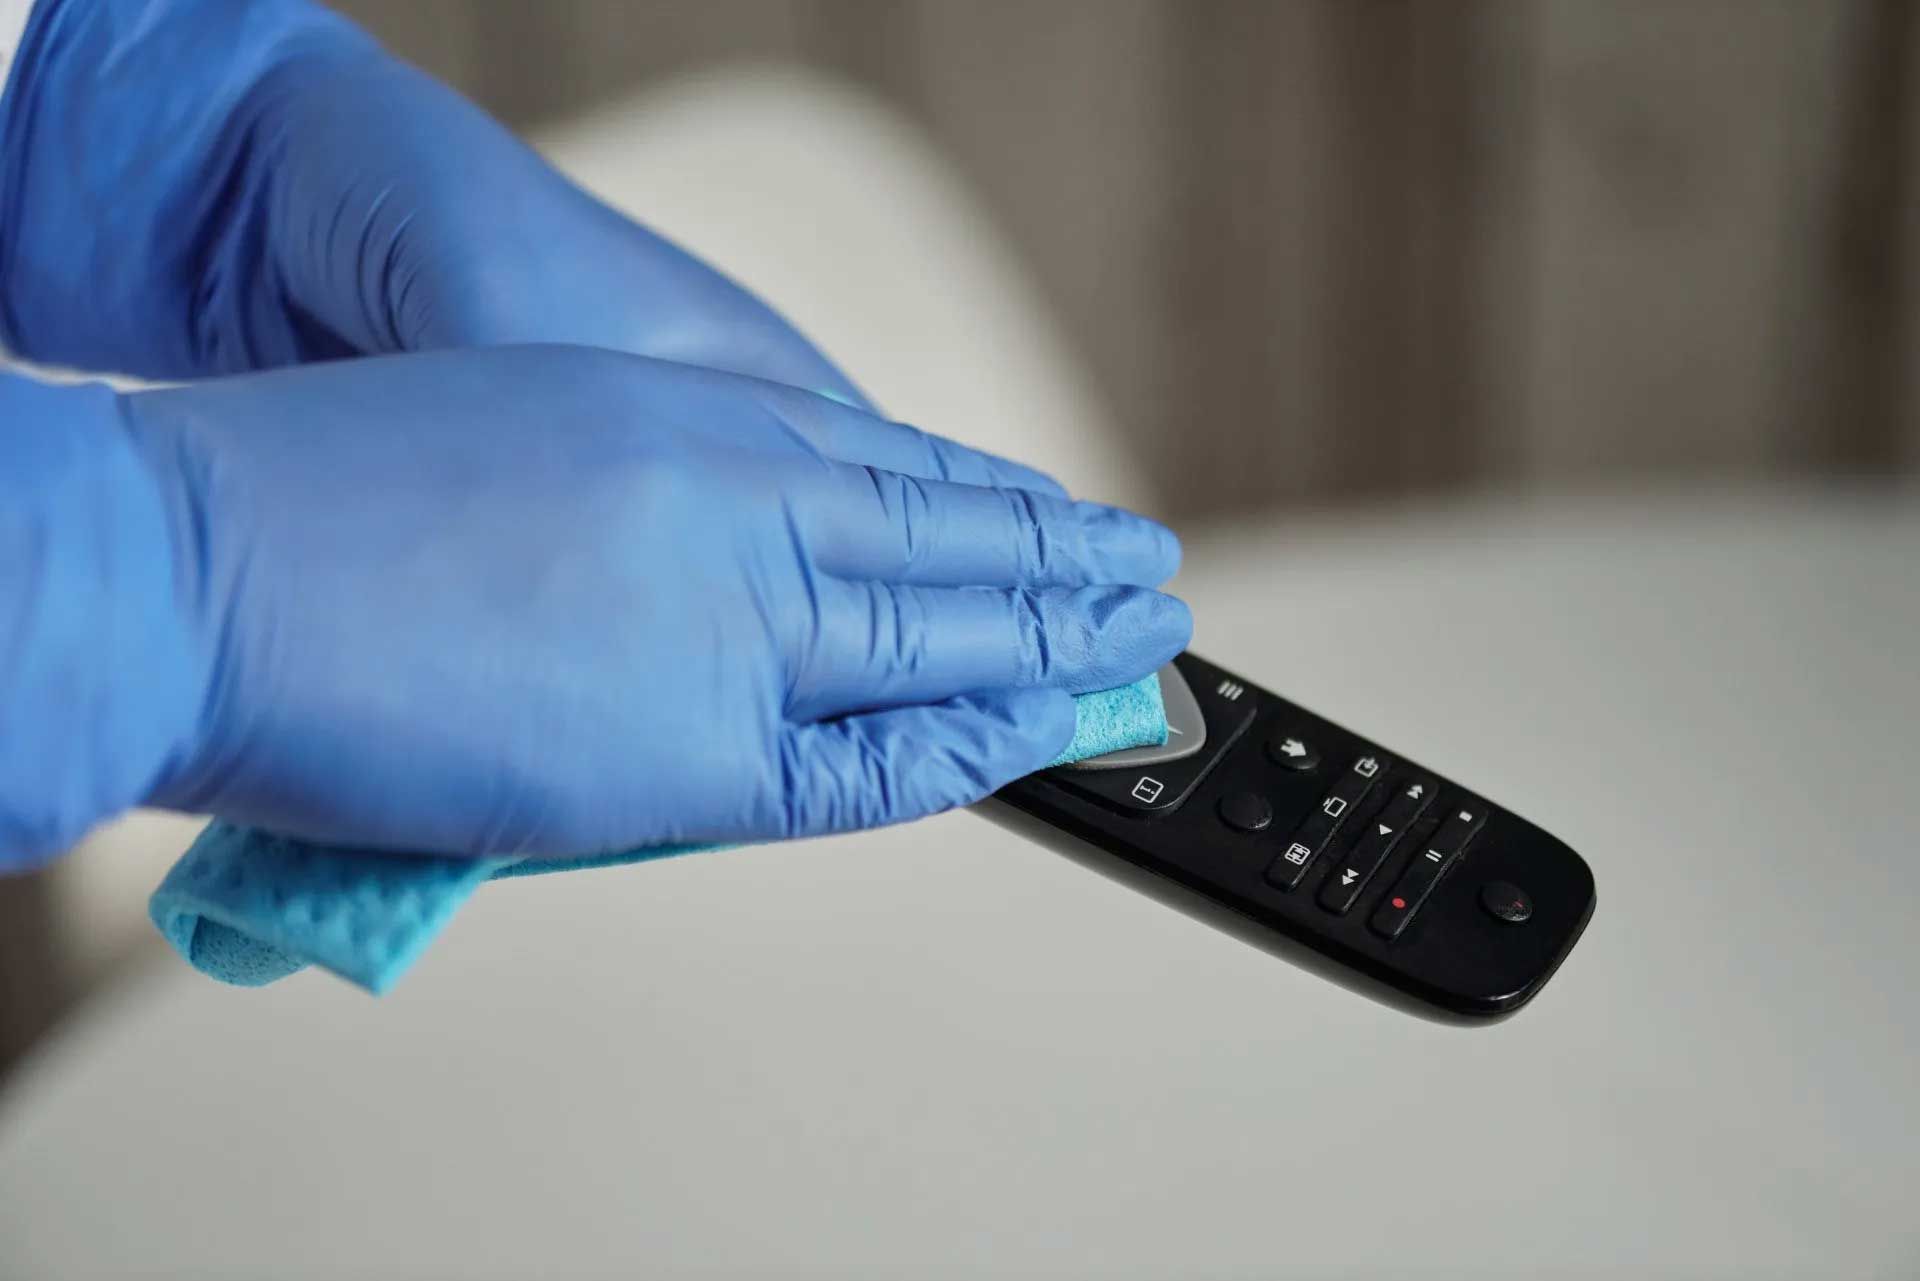 a person wearing blue gloves is cleaning a remote control with a cloth .